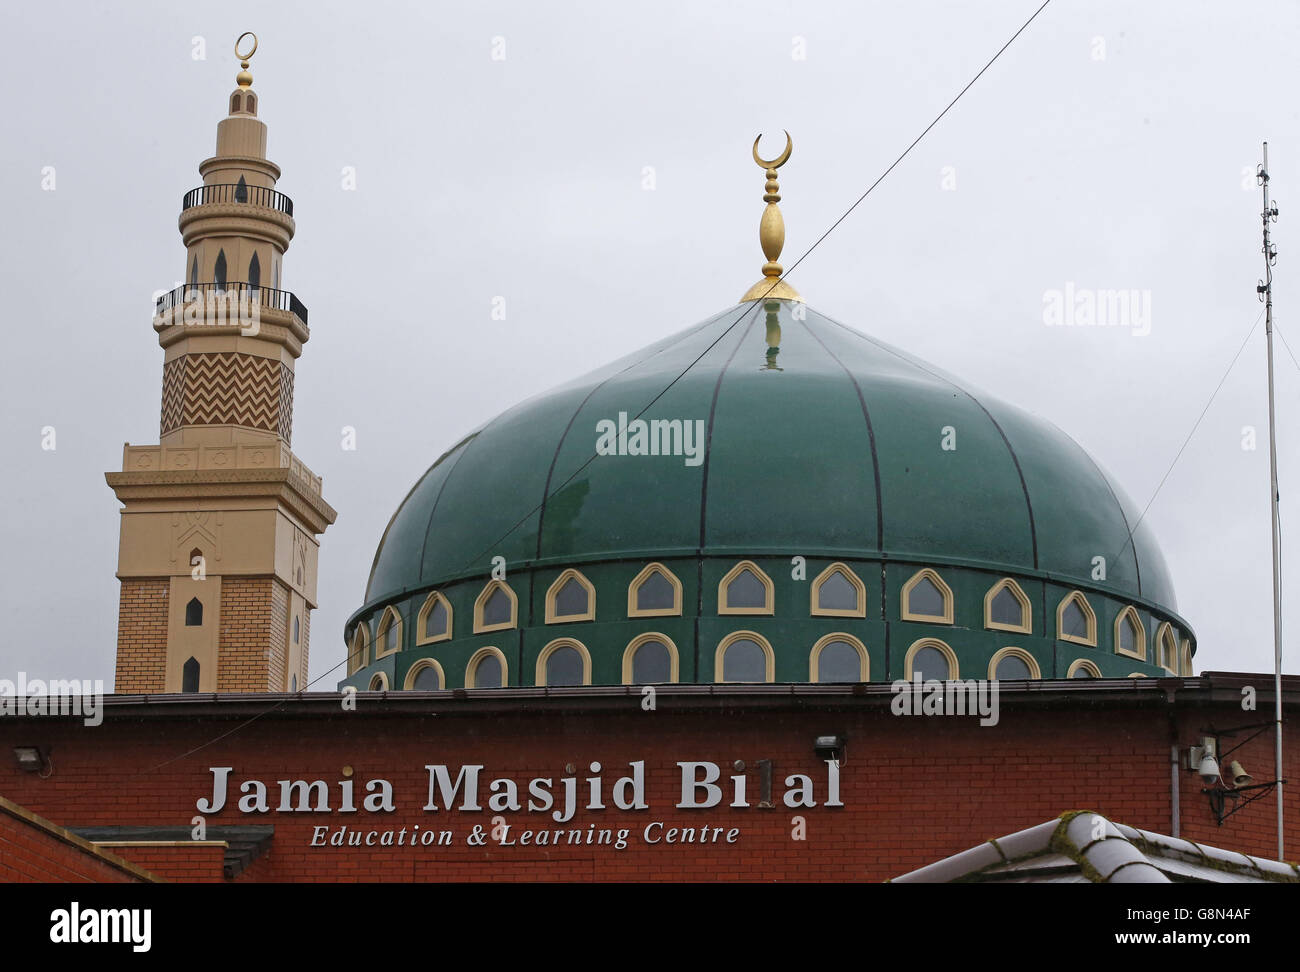 Jamia Masjid Bilal Mosque in Rochdale near where Jalal Uddin, 64, has died after being found with serious head injuries while on his way home from evening prayers. Stock Photo